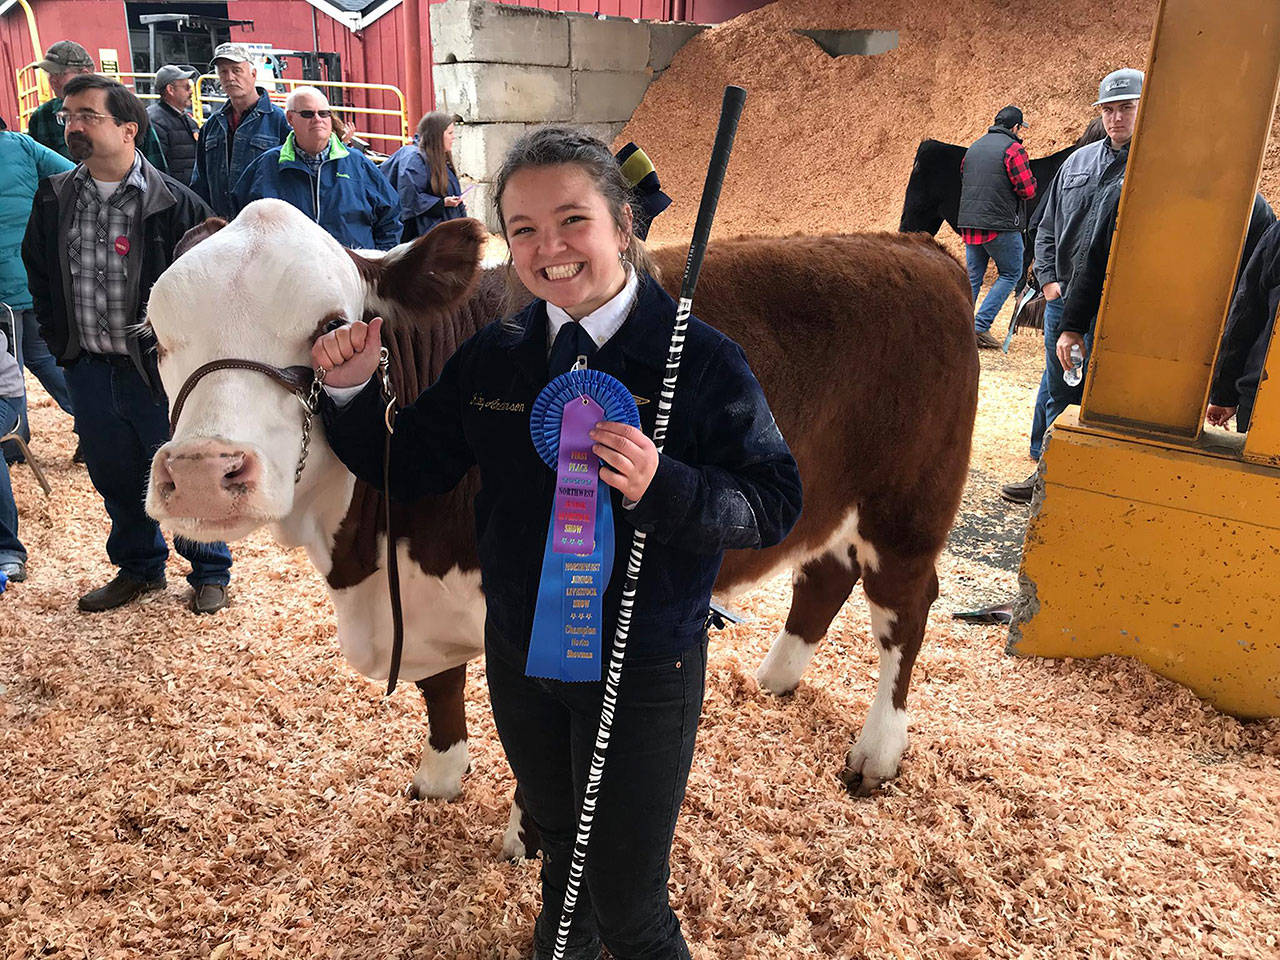 Pictured is former Enumclaw FFA Vice President Ruby Anderson with her first-place bovine during the 2019 Junior Livestock Show at the Puyallup Spring Fair. Anderson has gone on to study agriculture at Washington State University, and was a workshop leader for the 2020 EMERGE Leadership Conference for the Greenhand Track. Photo courtesy Enumclaw FFA